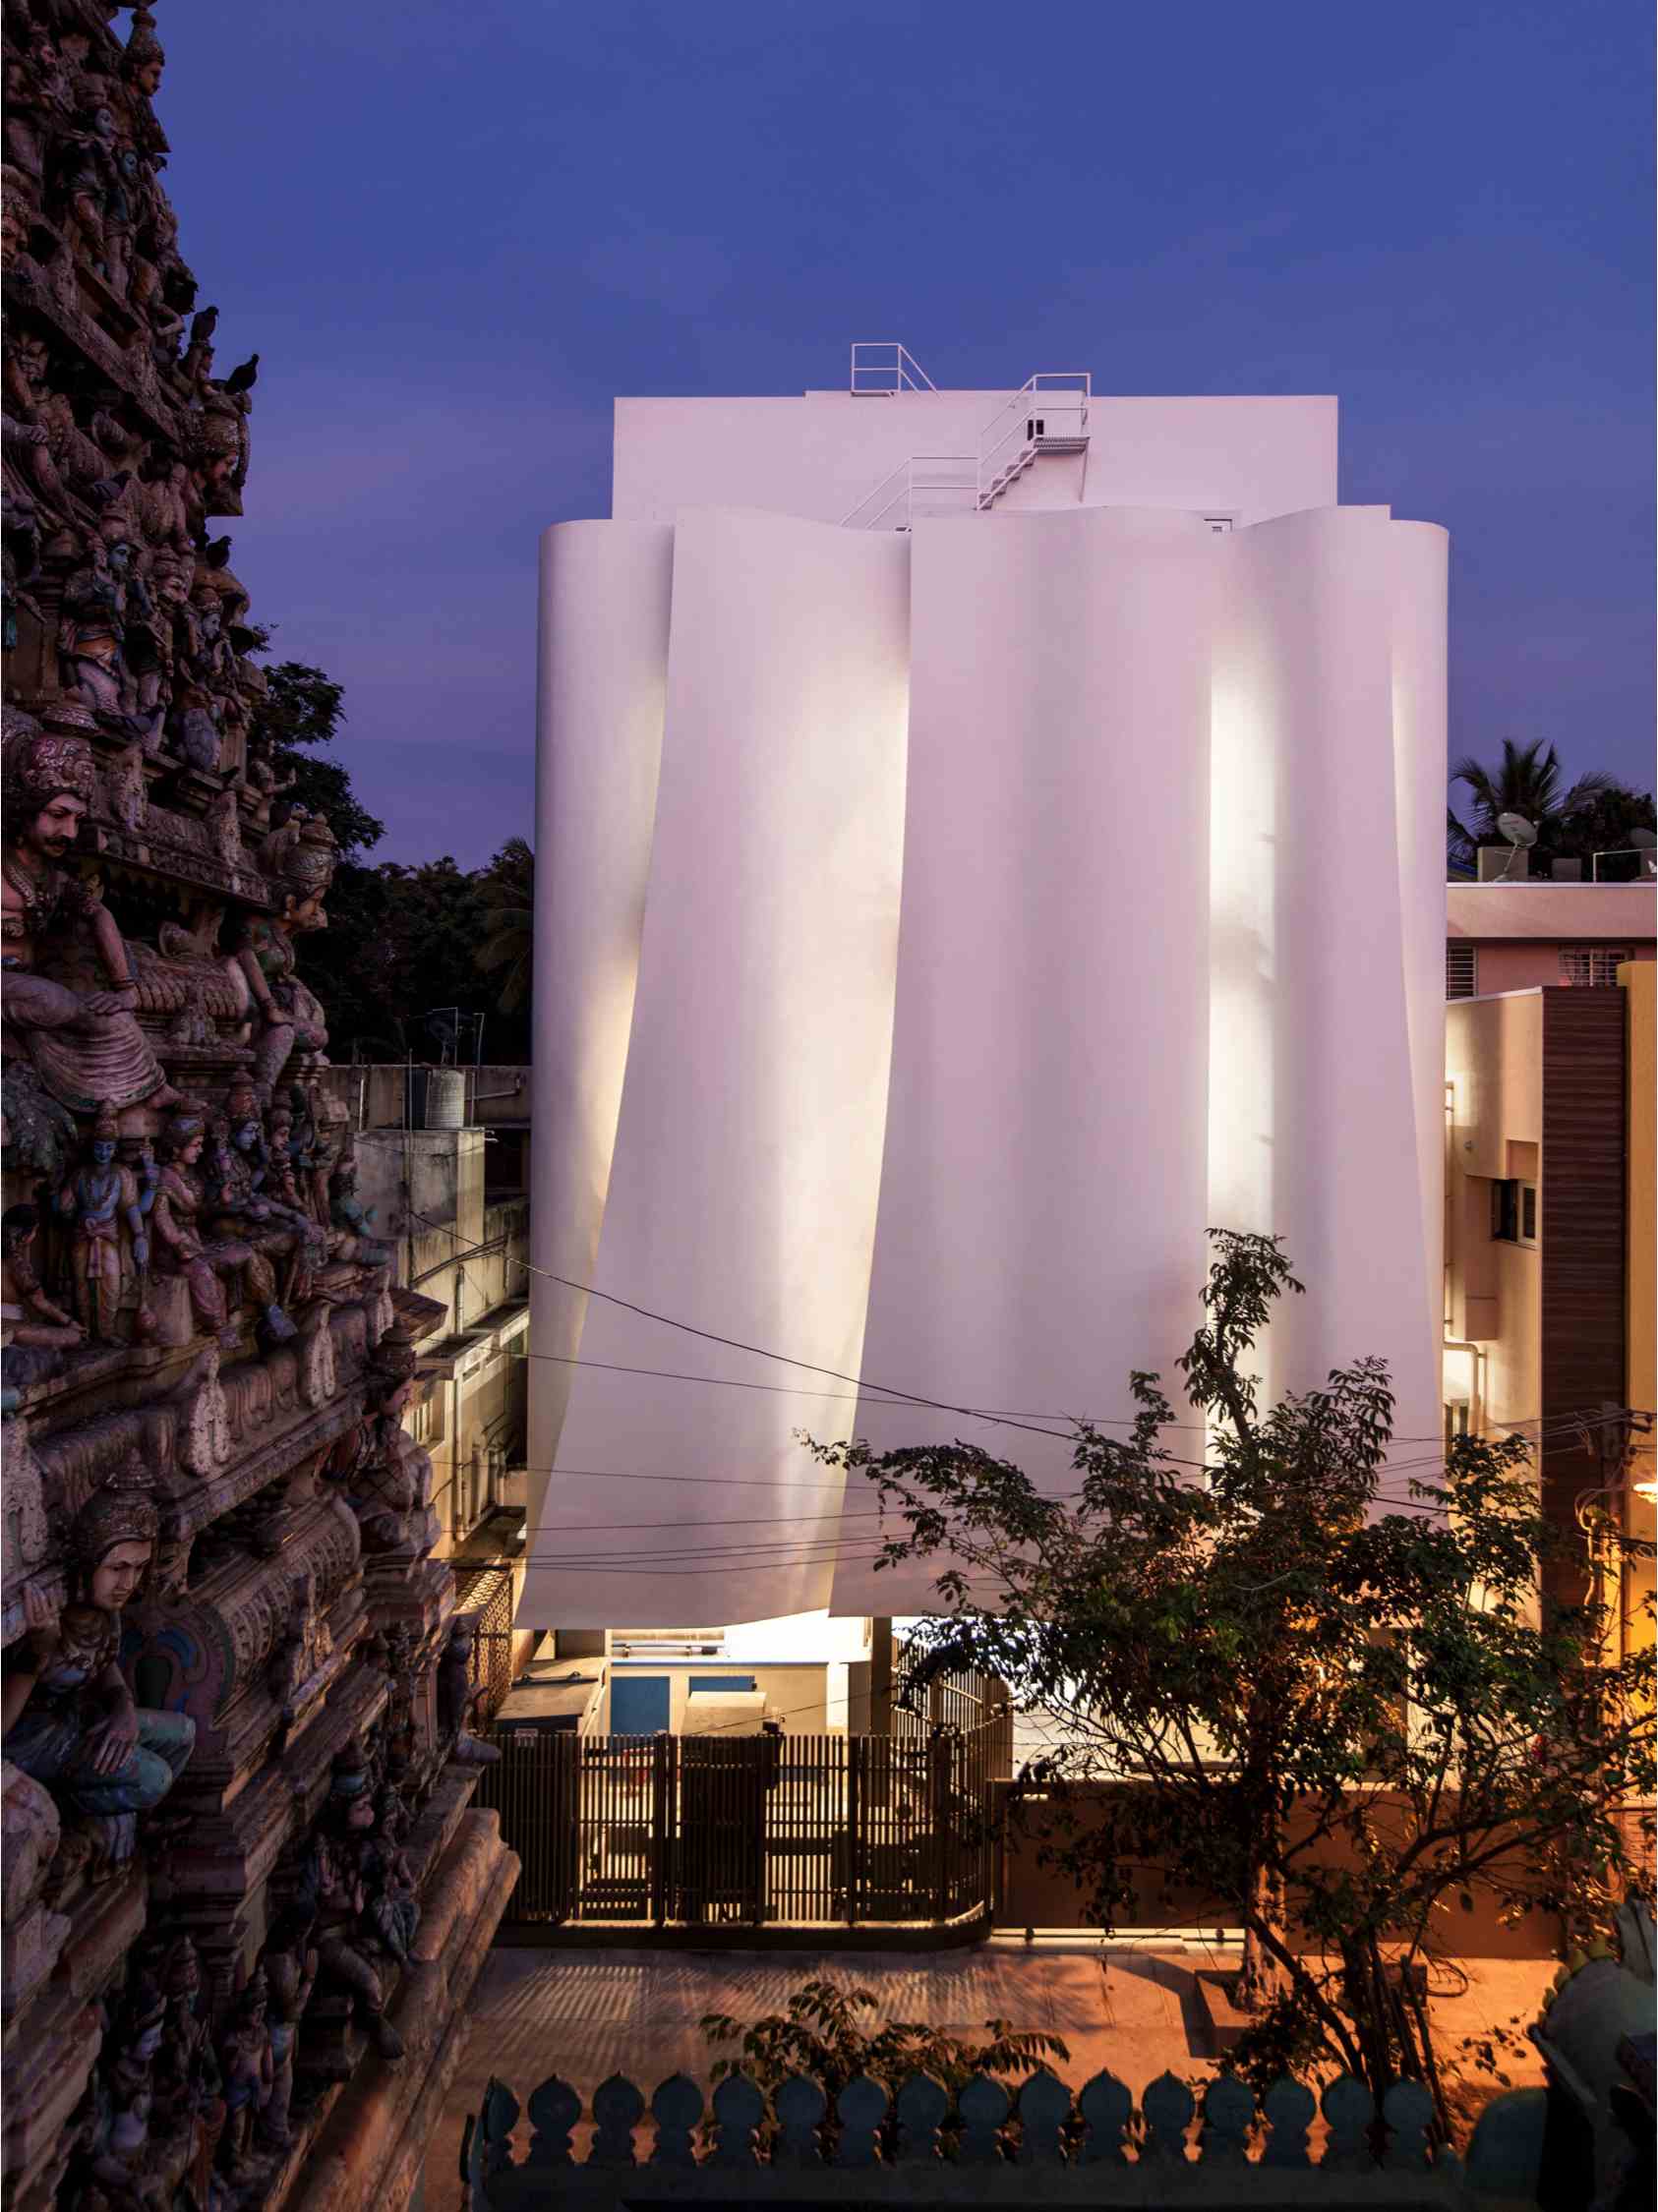 KMYF at Bangalore, by Cadence Architects 2